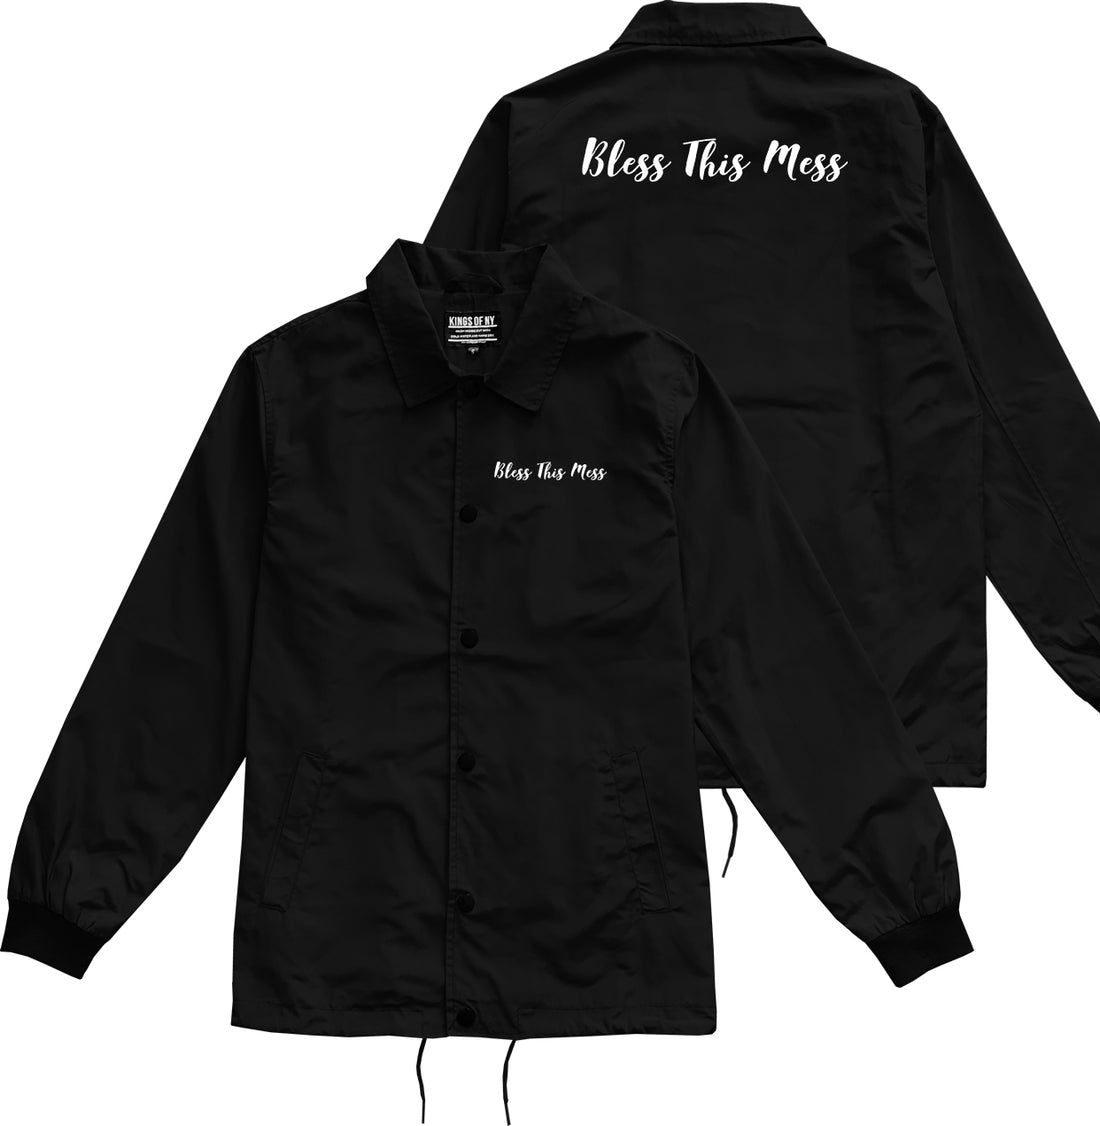 Bless This Mess Black Coaches Jacket by Kings Of NY